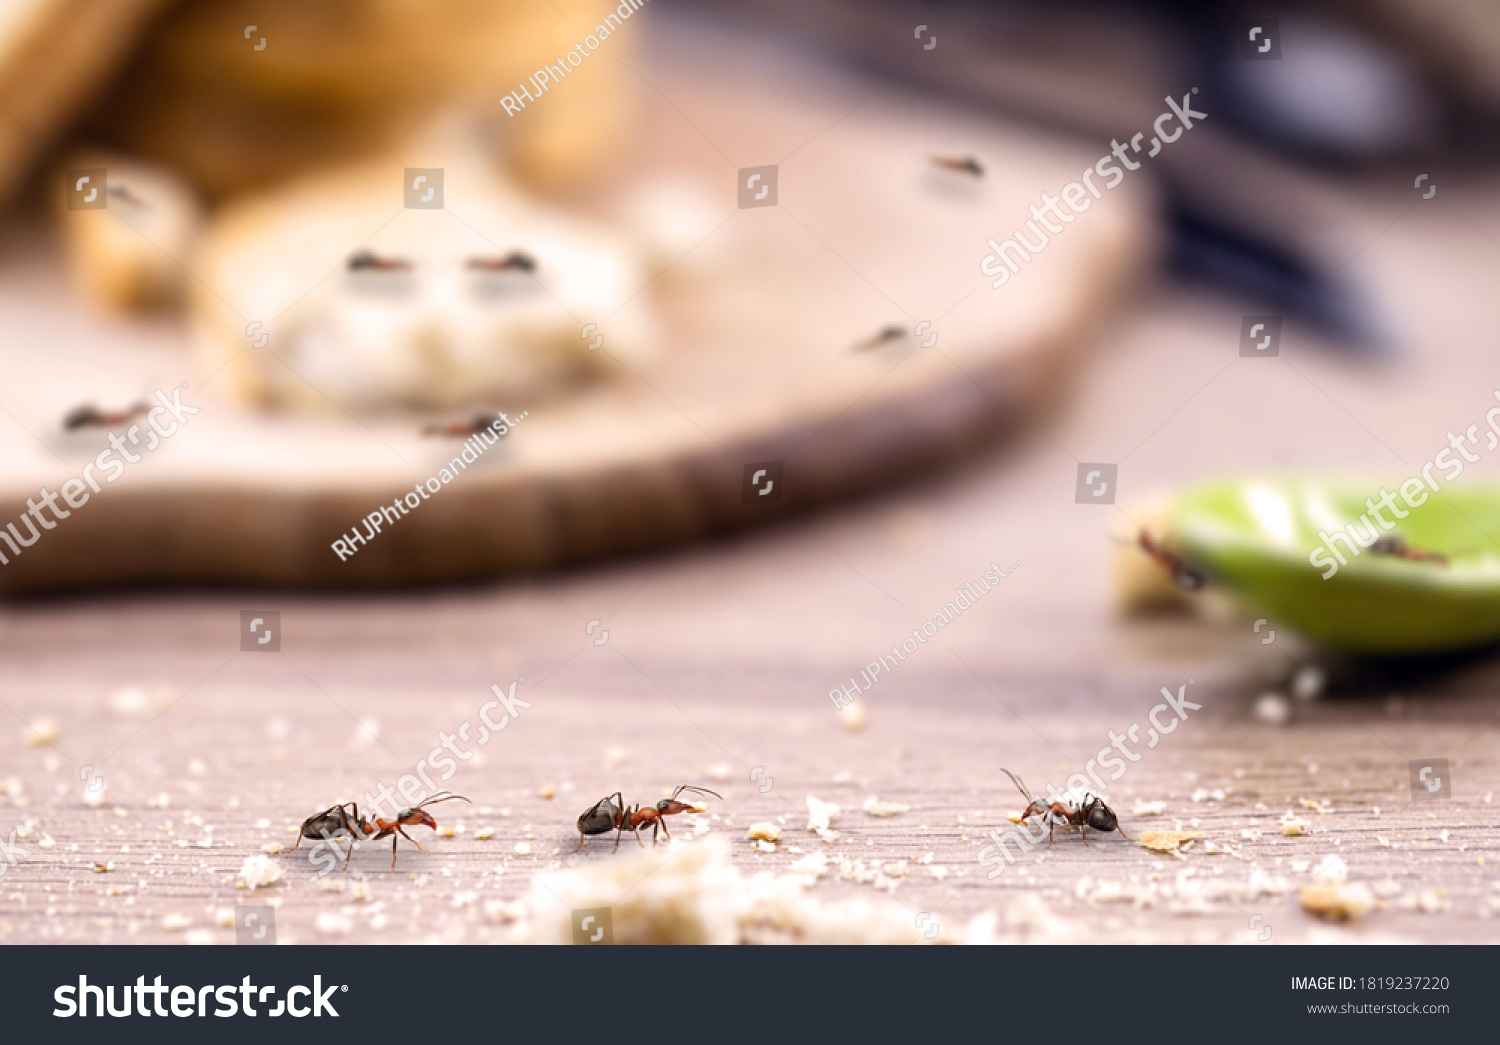 little red ant eating and carrying leftover breadcrumbs on the kitchen table. Concept of poor hygiene or homemade pest, point focus #1819237220